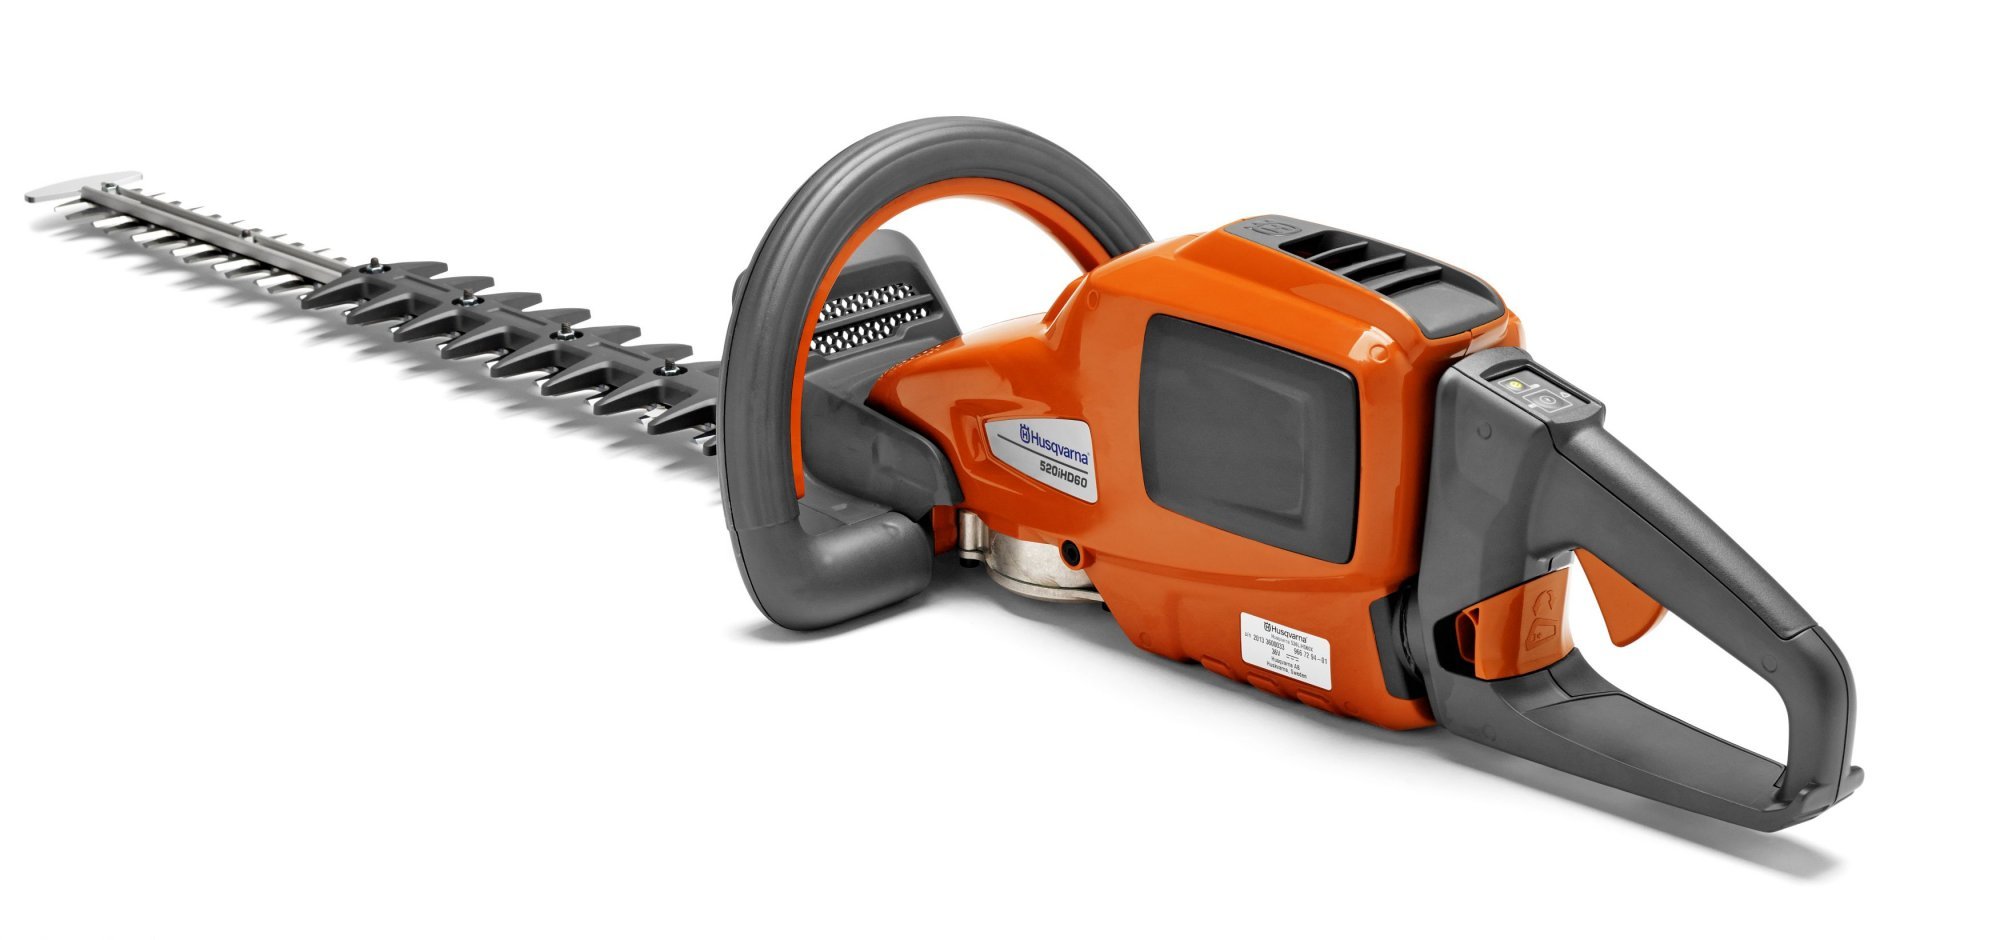 powered hedge trimmers